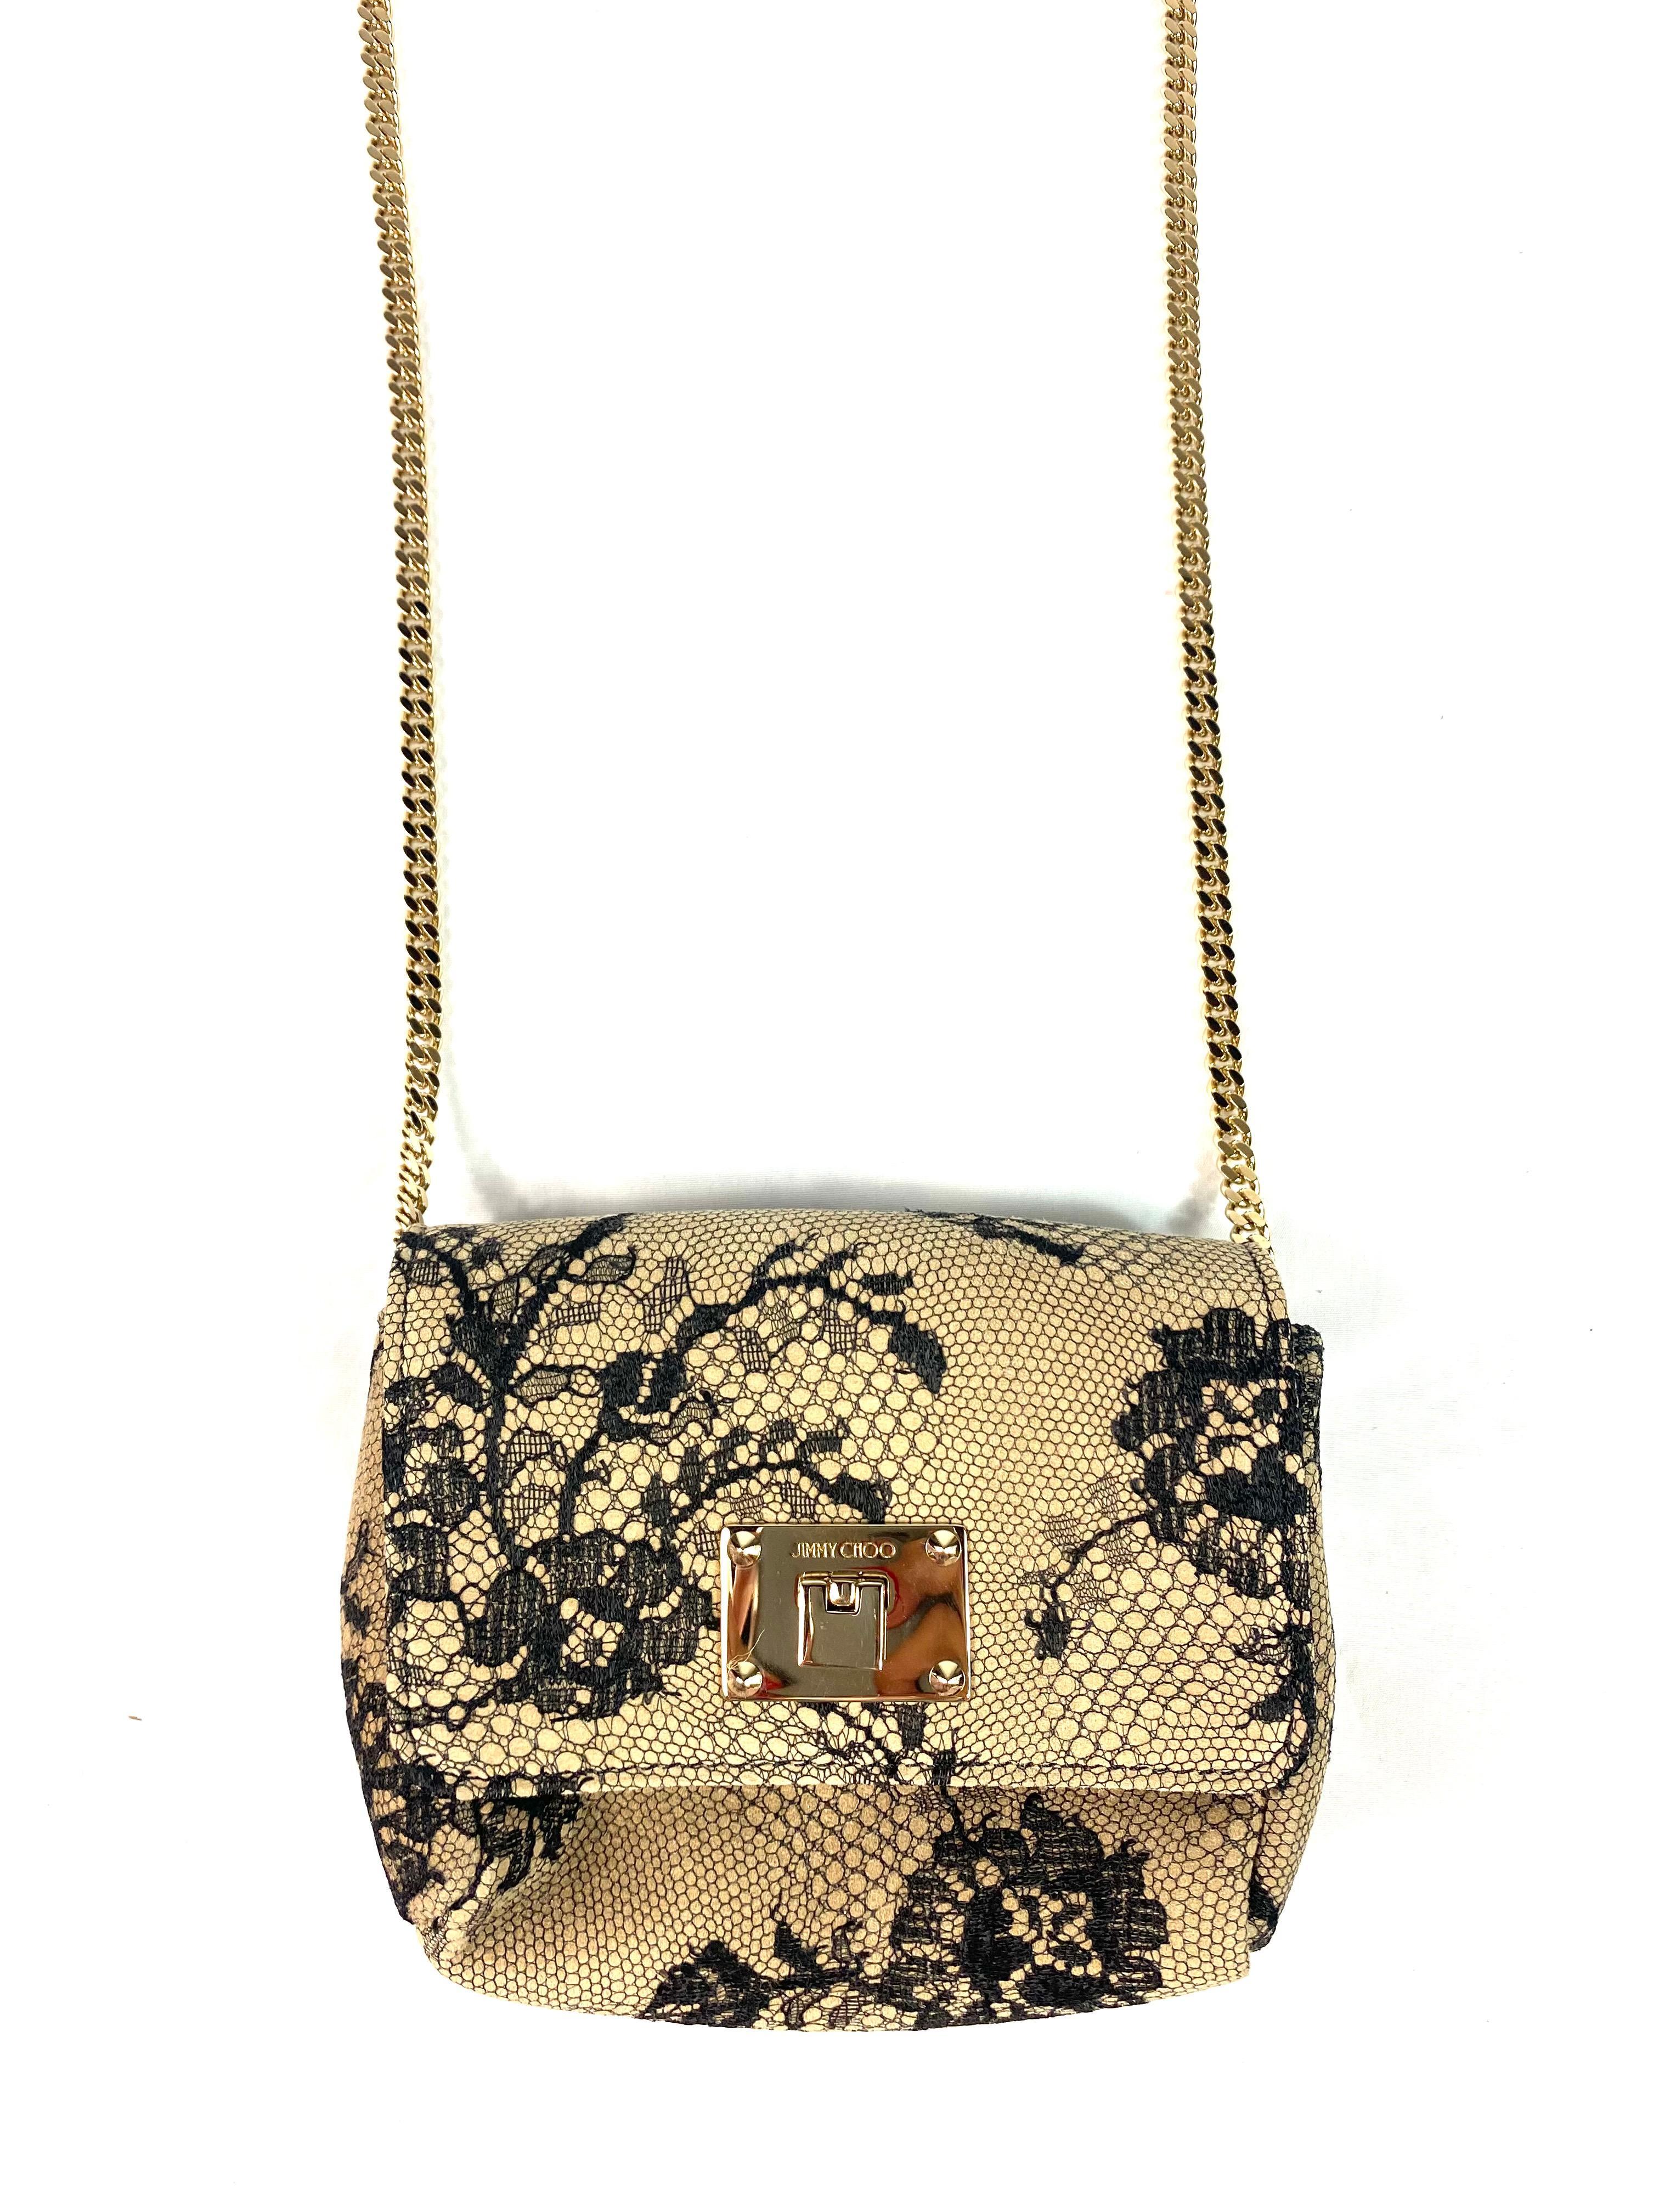 Product details:

The purse is made out leather covered with black floral lace, featuring gold tone hardware, chain shoulder strap (drops 24